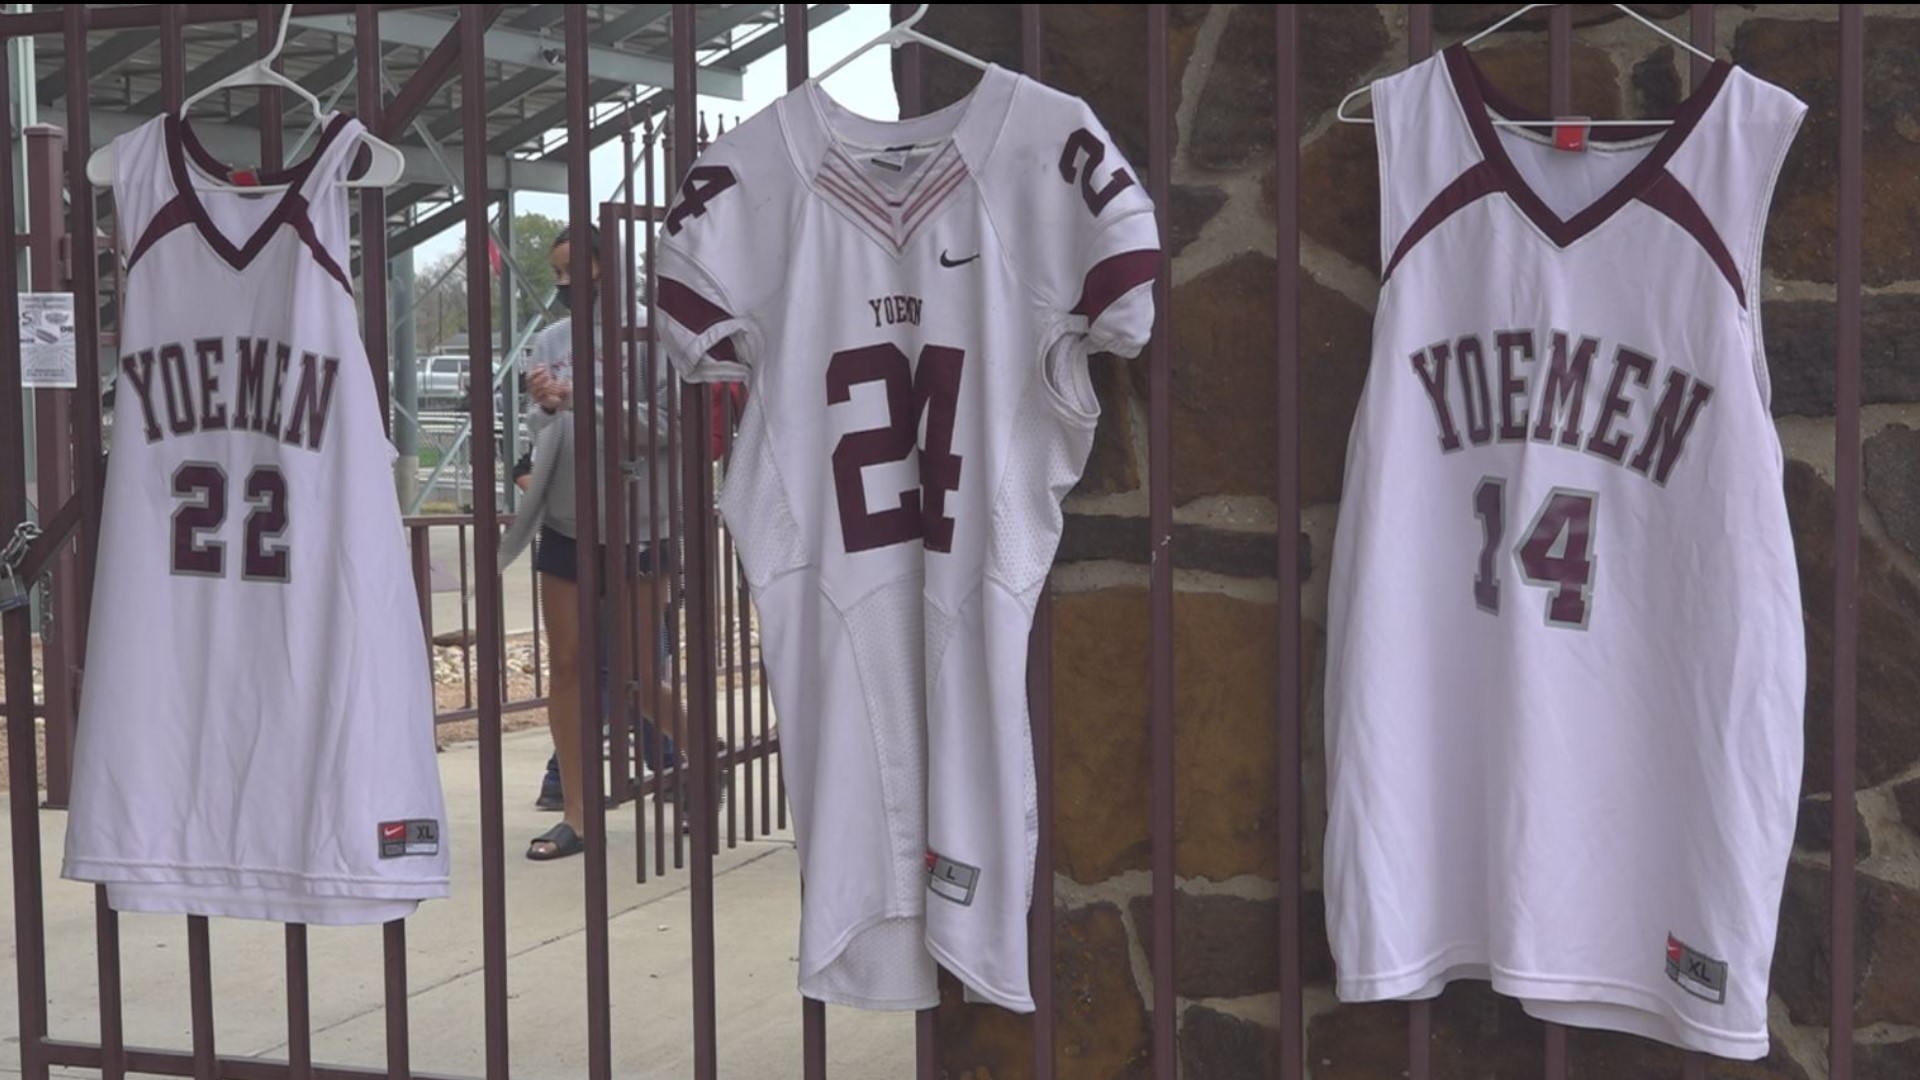 In Cameron they say: Once a Yoemen, always a Yoemen. The community demonstrated that Saturday as they mourned the loss of three alumni while supporting the families.